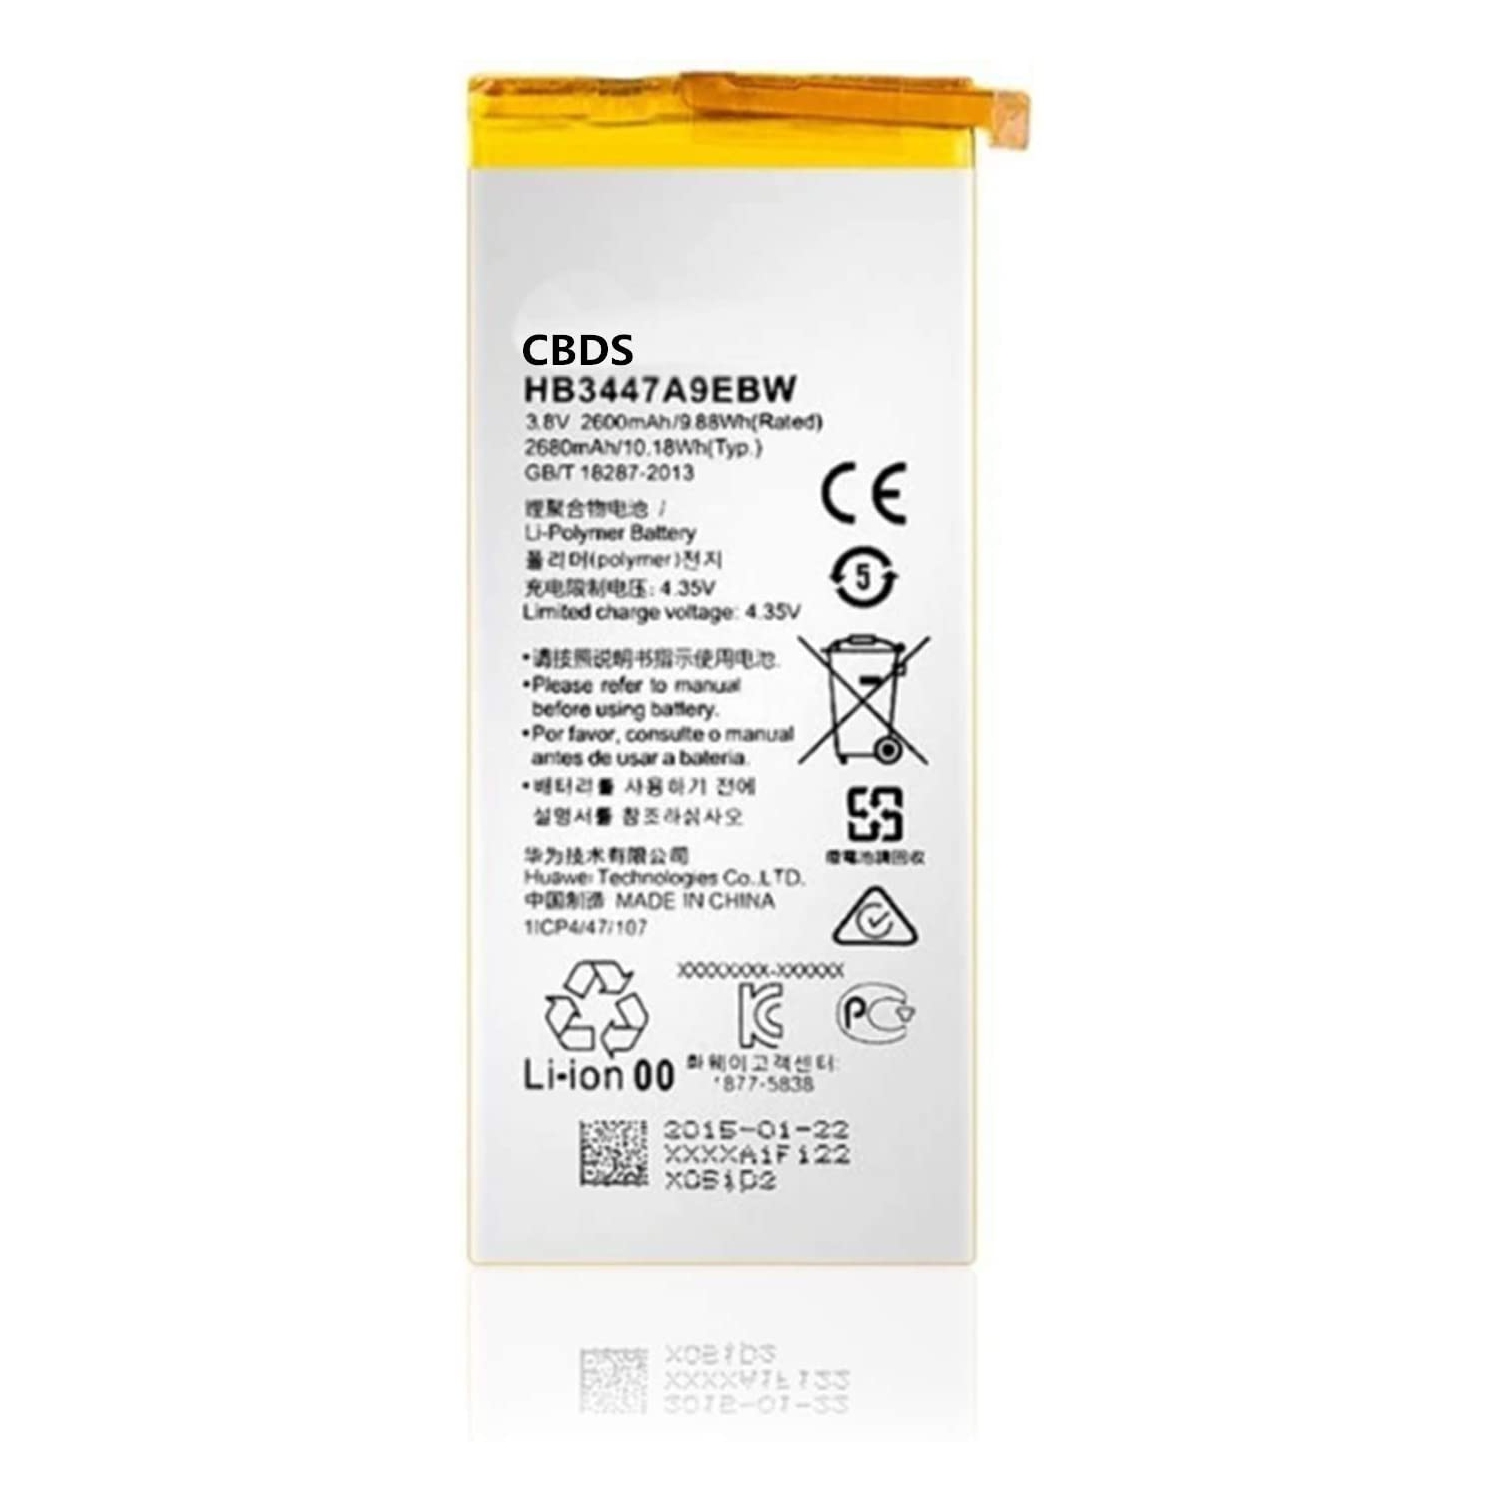 (CBDS) 2680mAh, 10.18 Wh Replacement Battery - Compatible with Huawei P8 HB3447A9EBW in Non-Retail Packaging.